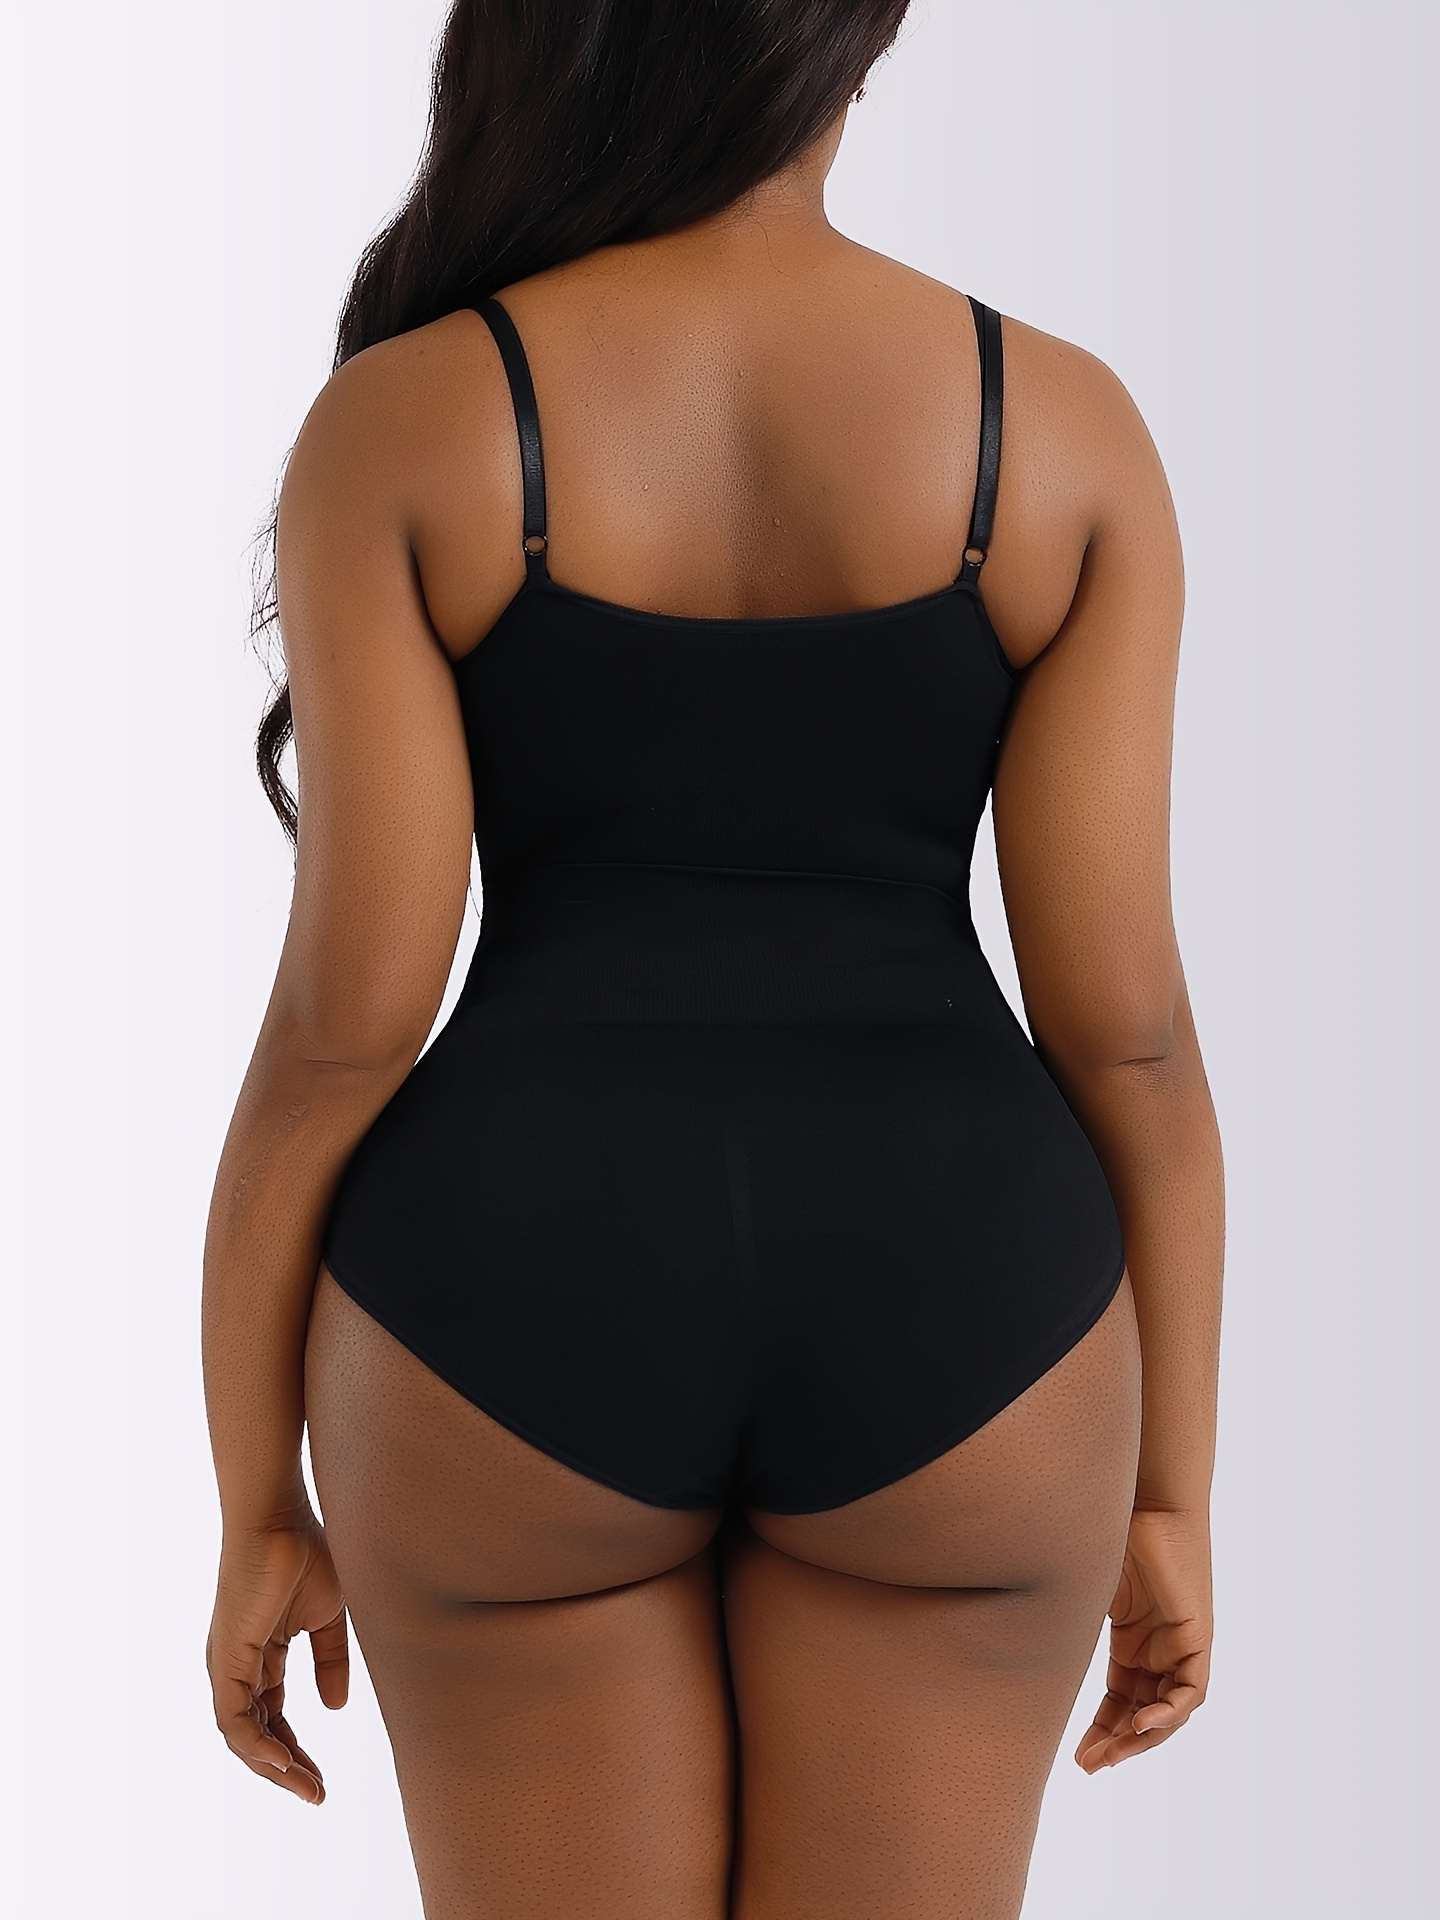 Women's Tummy Control Butt Lifter Body Shaper, Invisible Seamless Under  Dress Slimming Strap Thong Shapewear Bodysuit, Women's Underwear & Lingerie, Check Out Today's Deals Now